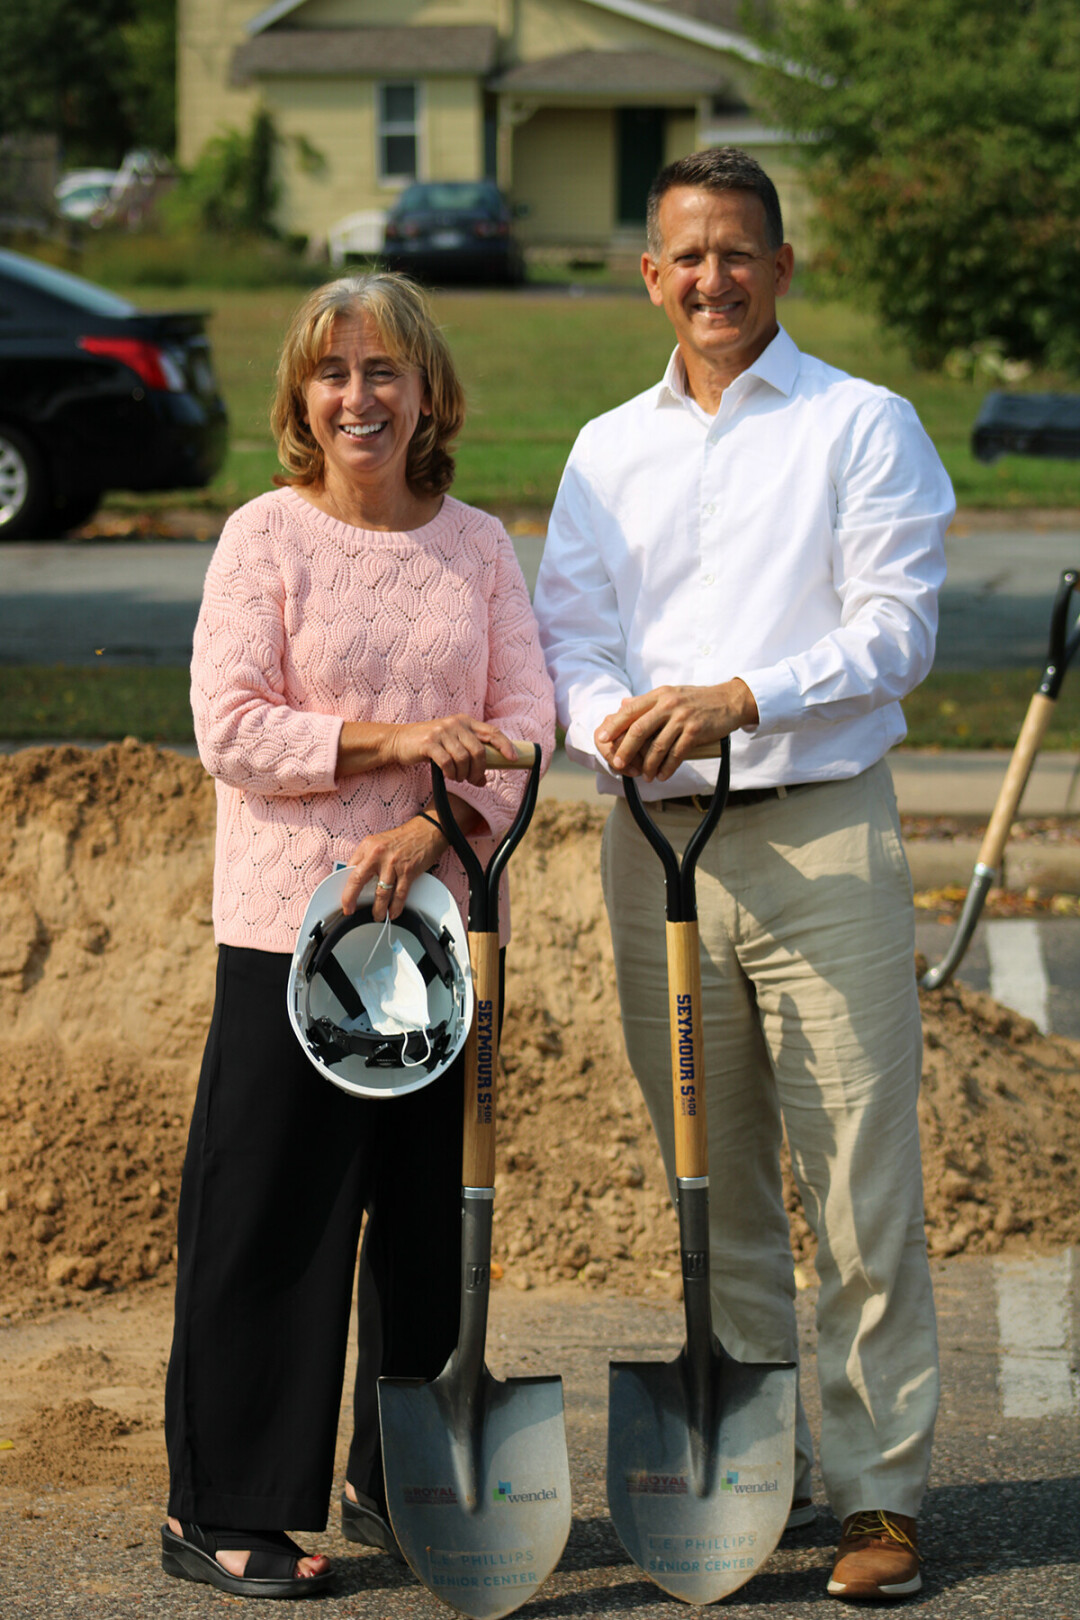 Executive Director Mary Pica-Anderson, left, and Jim Deignan, president of the senior center's board of directors, at the groundbreaking ceremony.